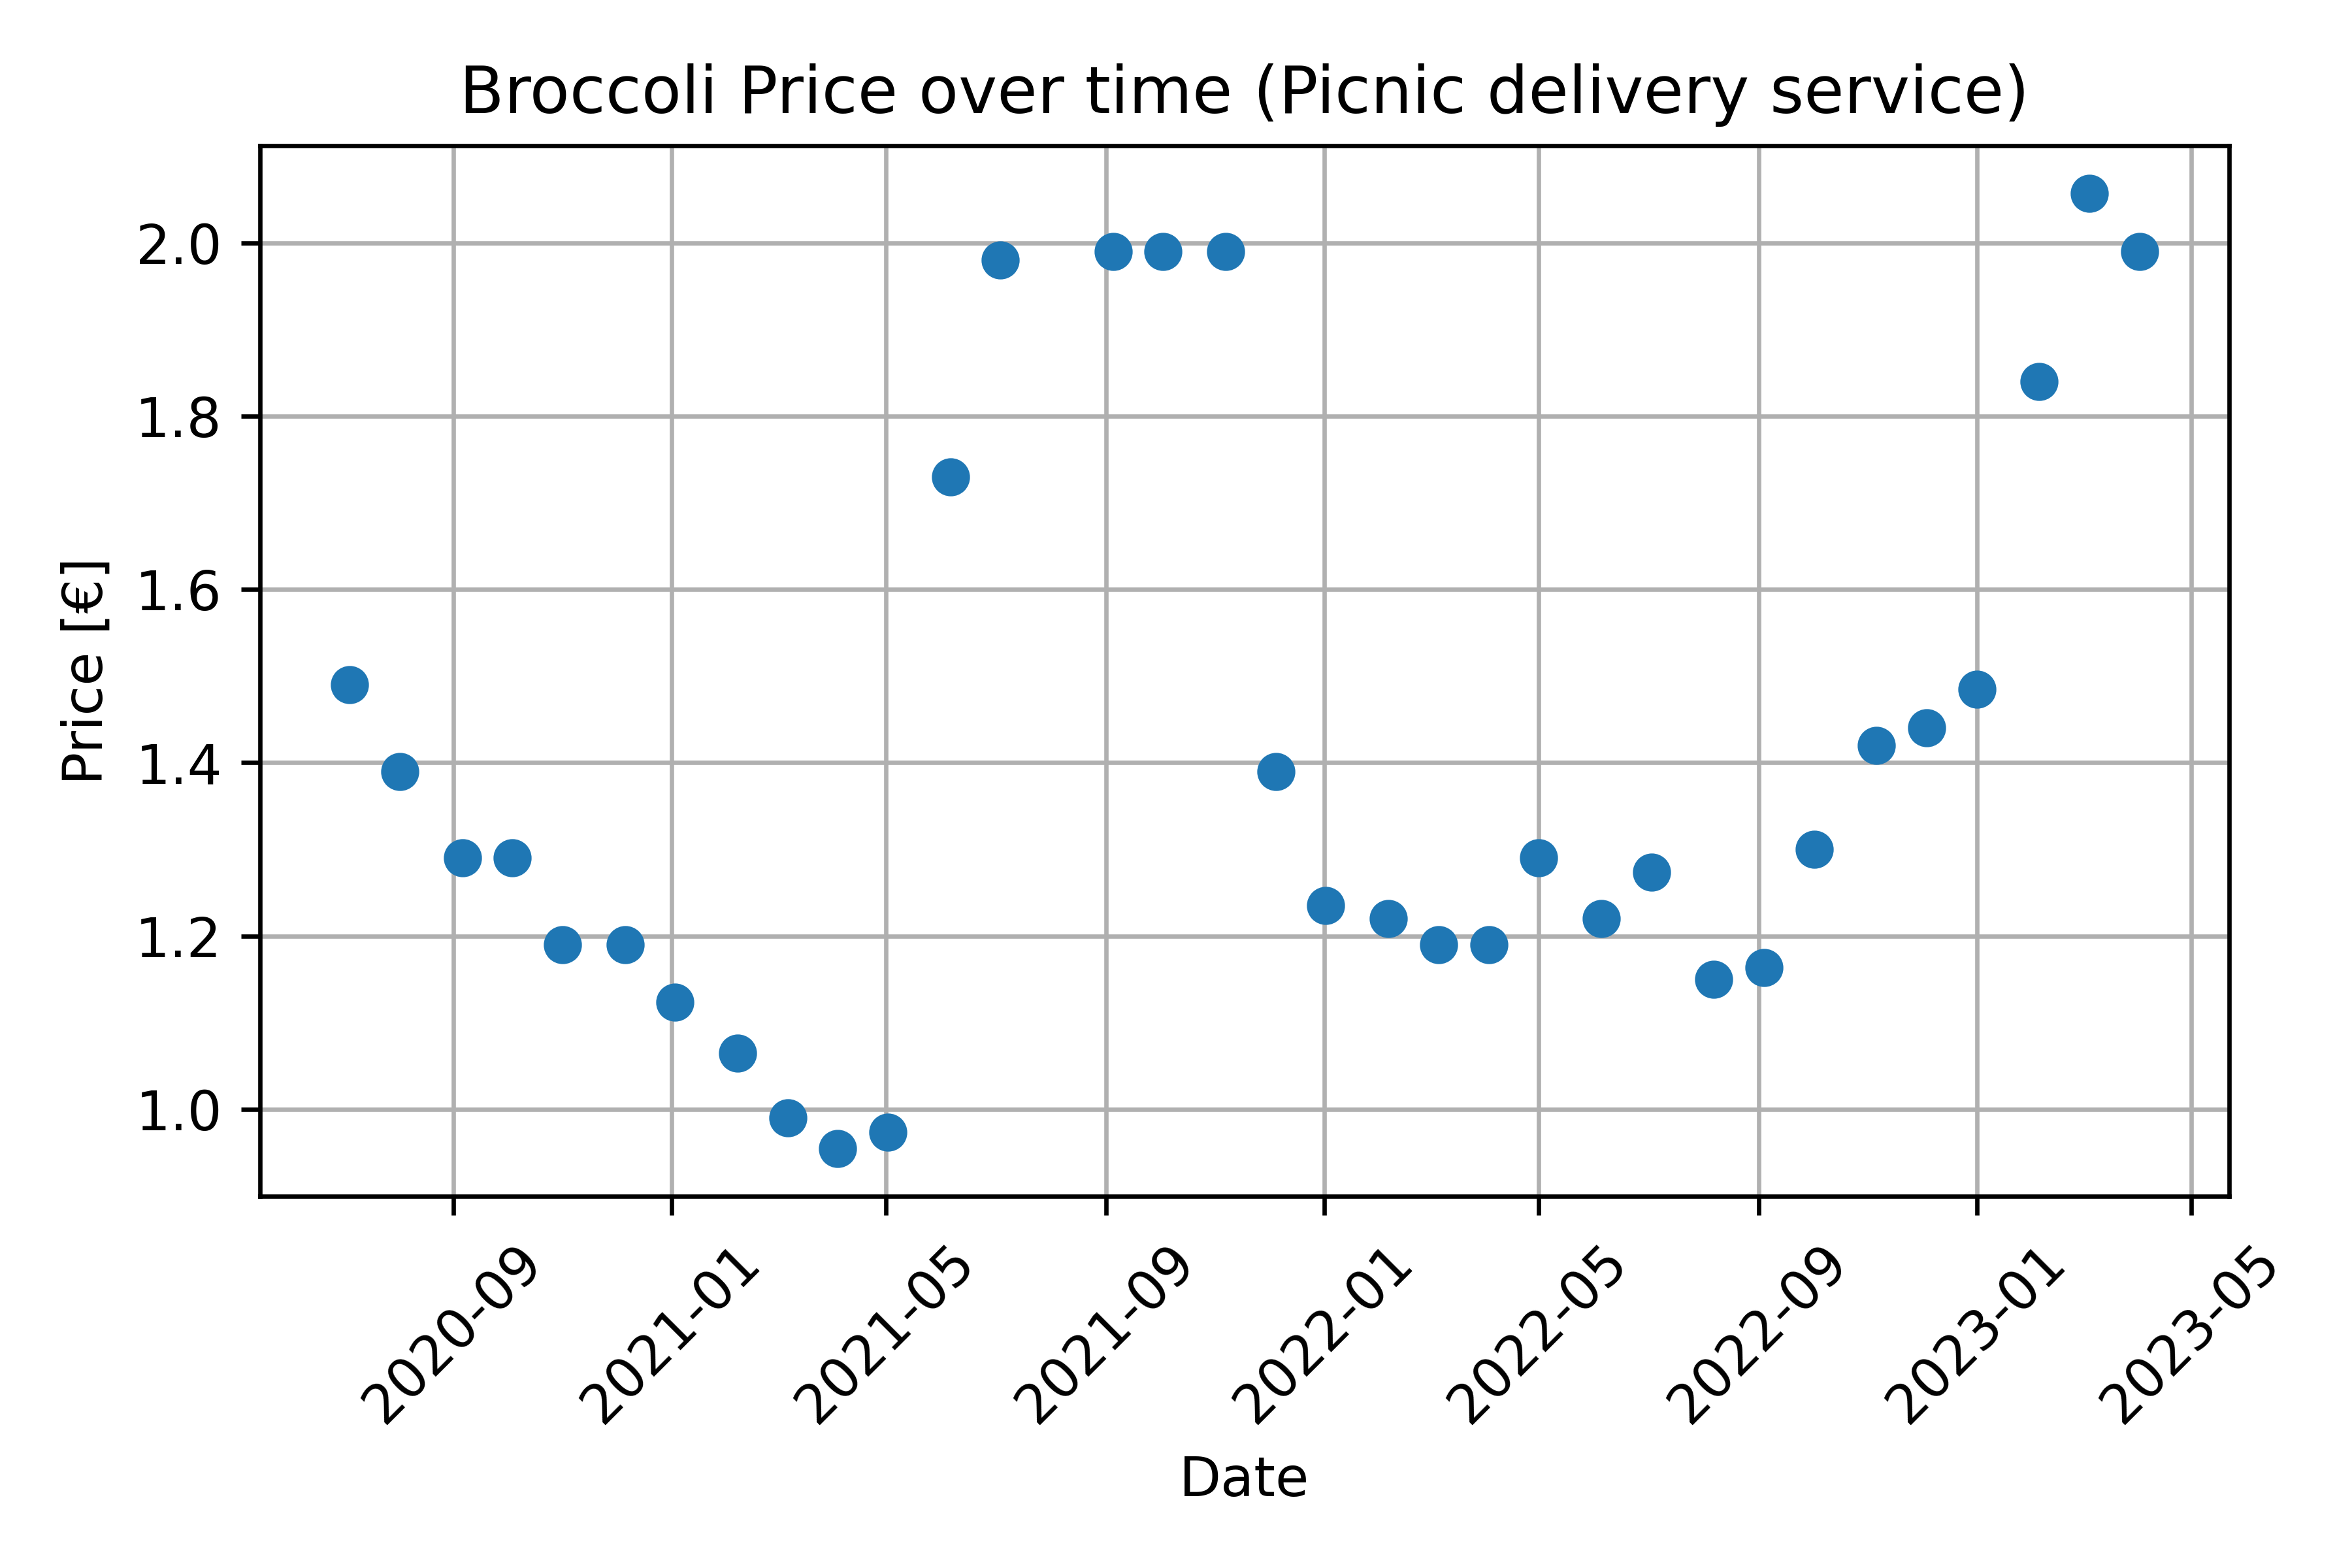 Broccoli prices over time